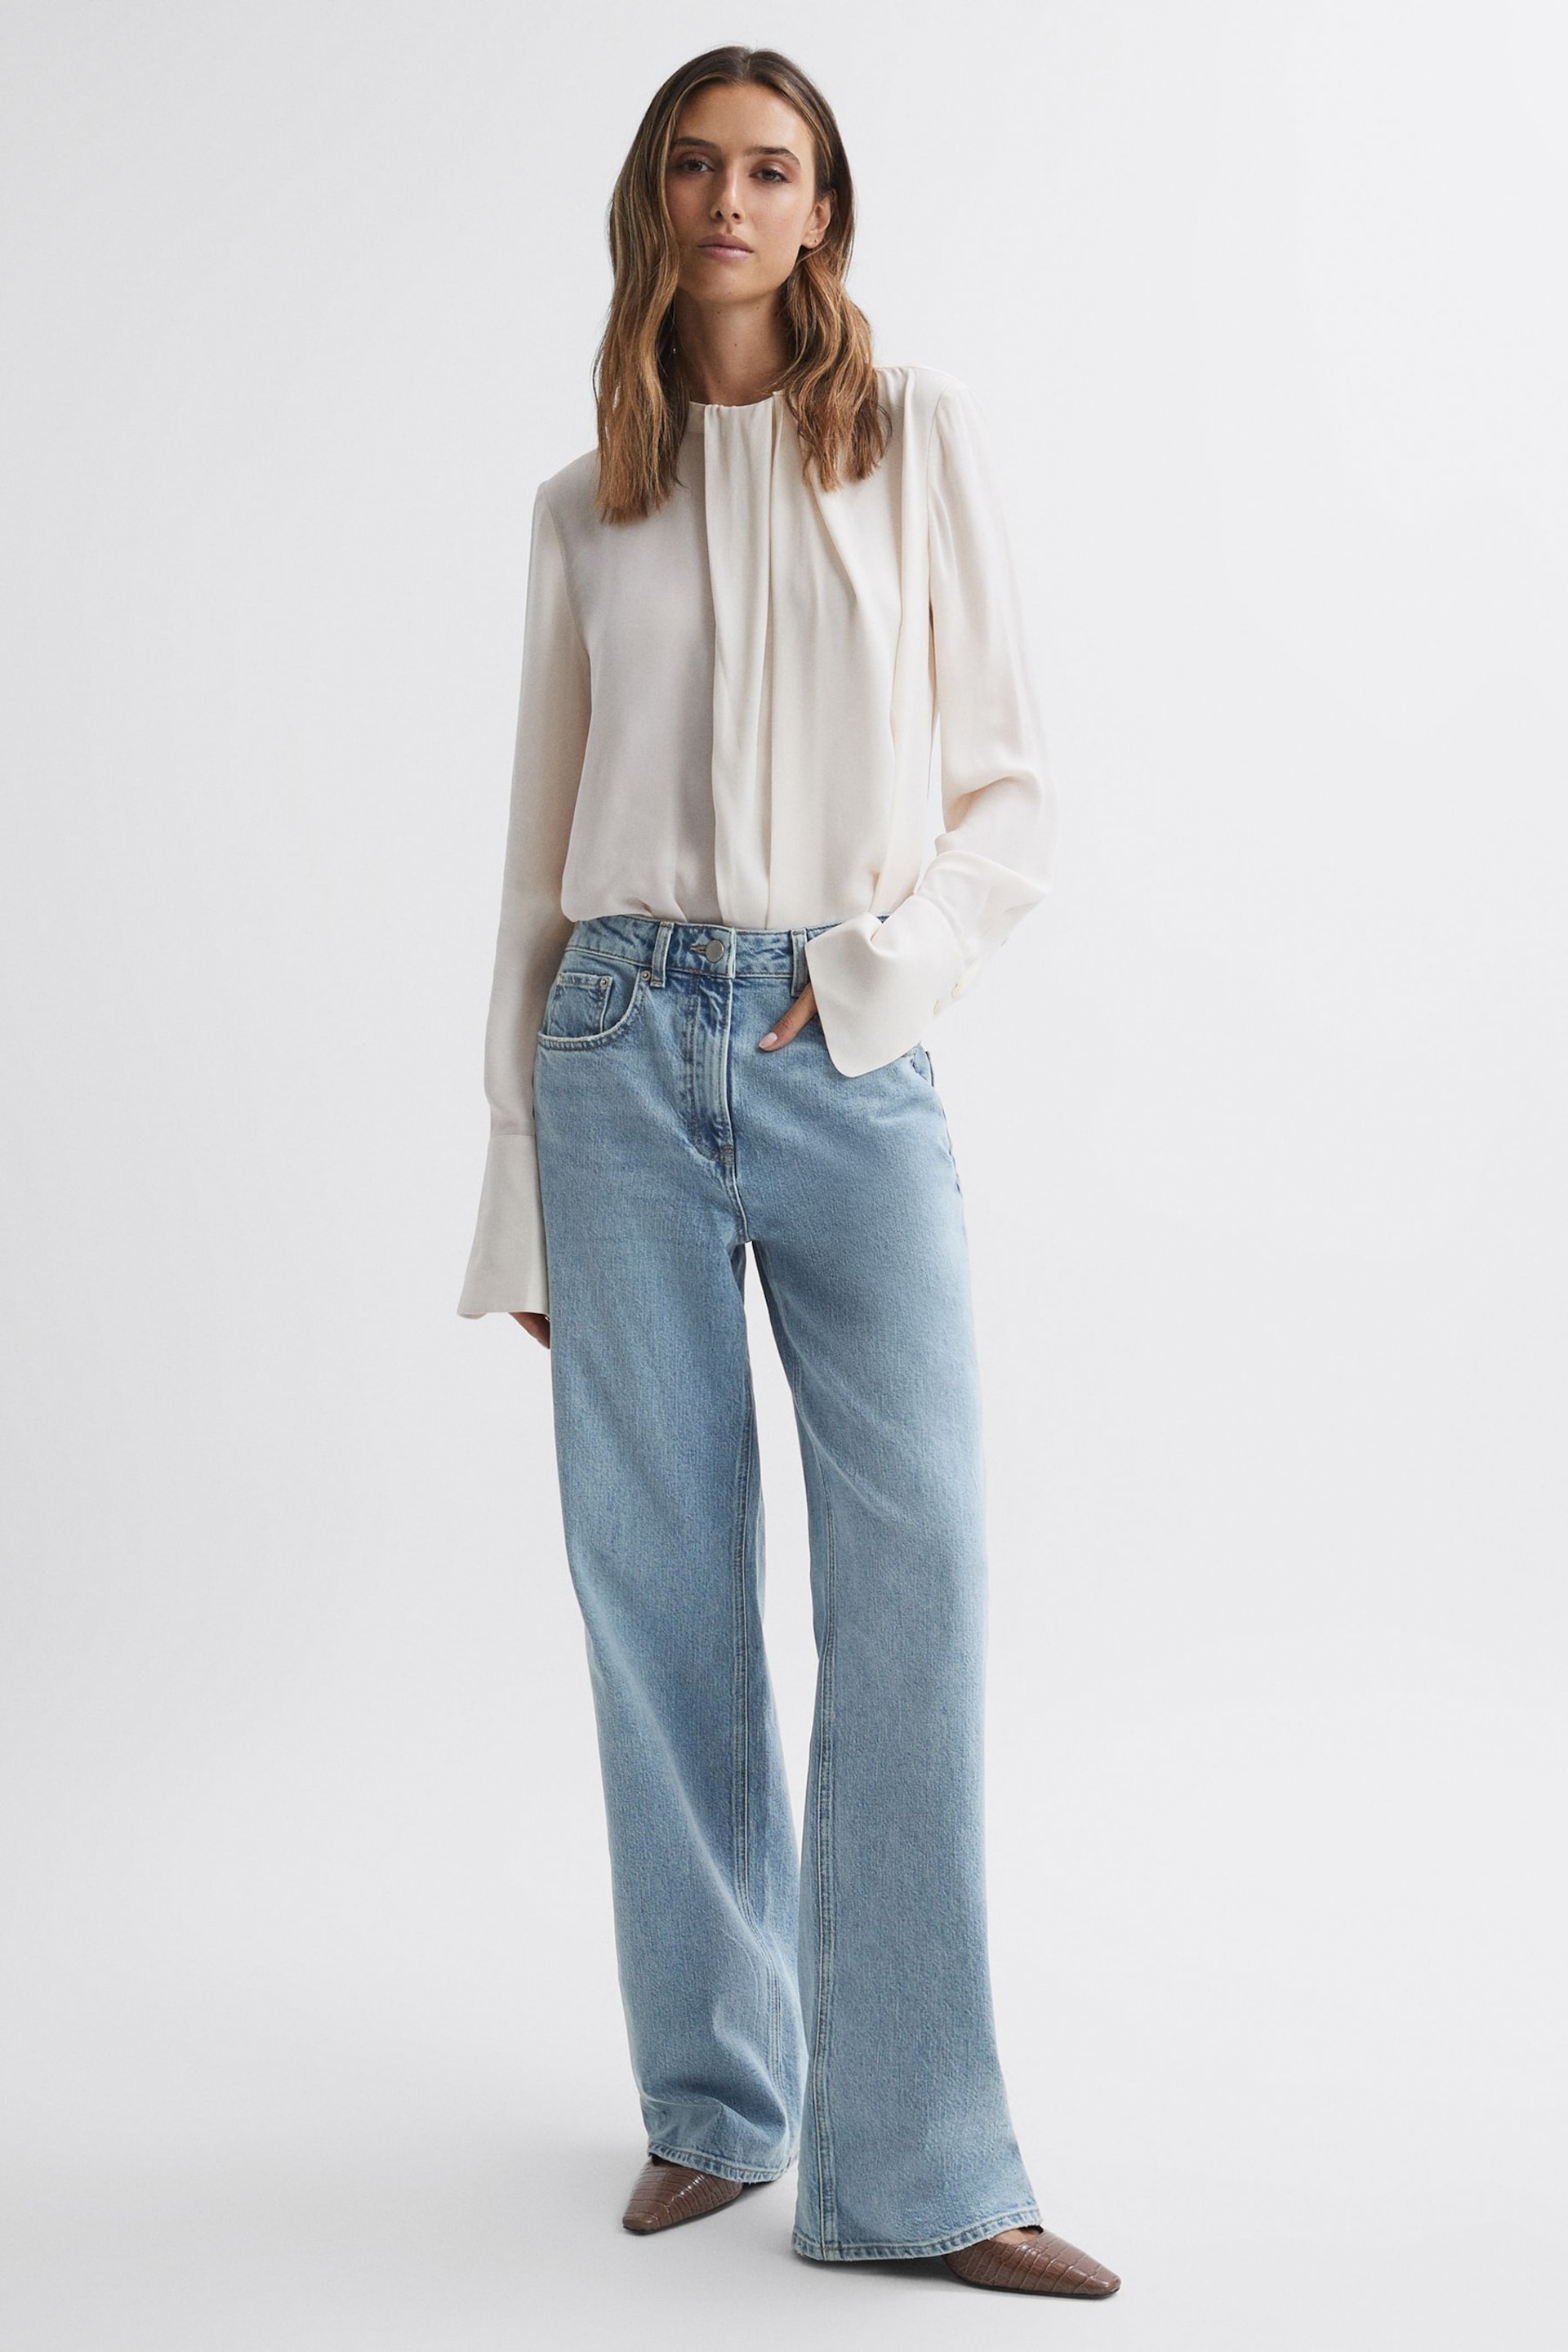 Reiss Light Blue Marion Mid Rise Wide Leg Jeans - Image 4 of 5